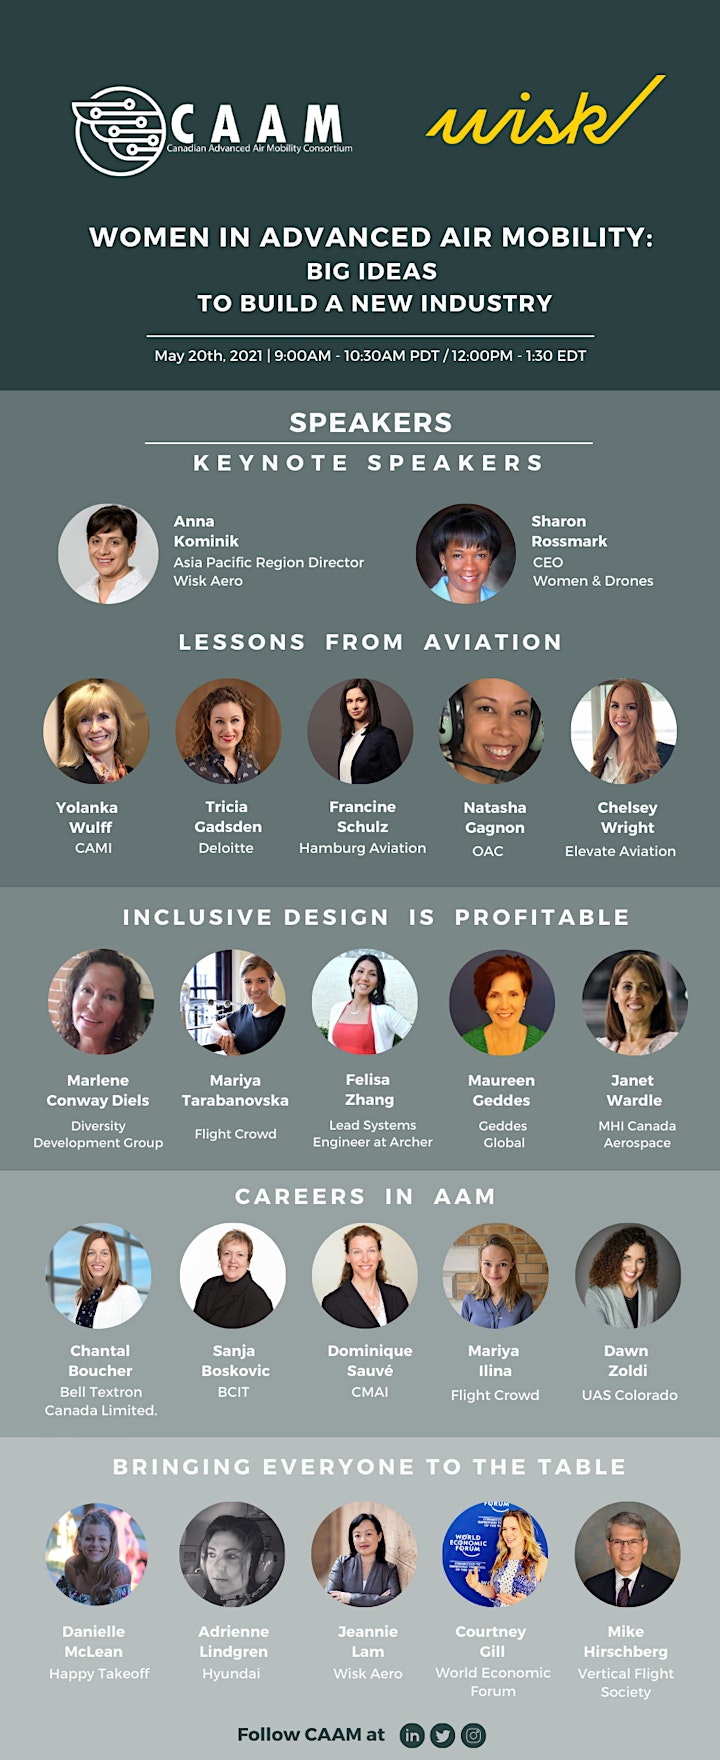 
		Women in Advanced Air Mobility: Big ideas to build a new industry image
